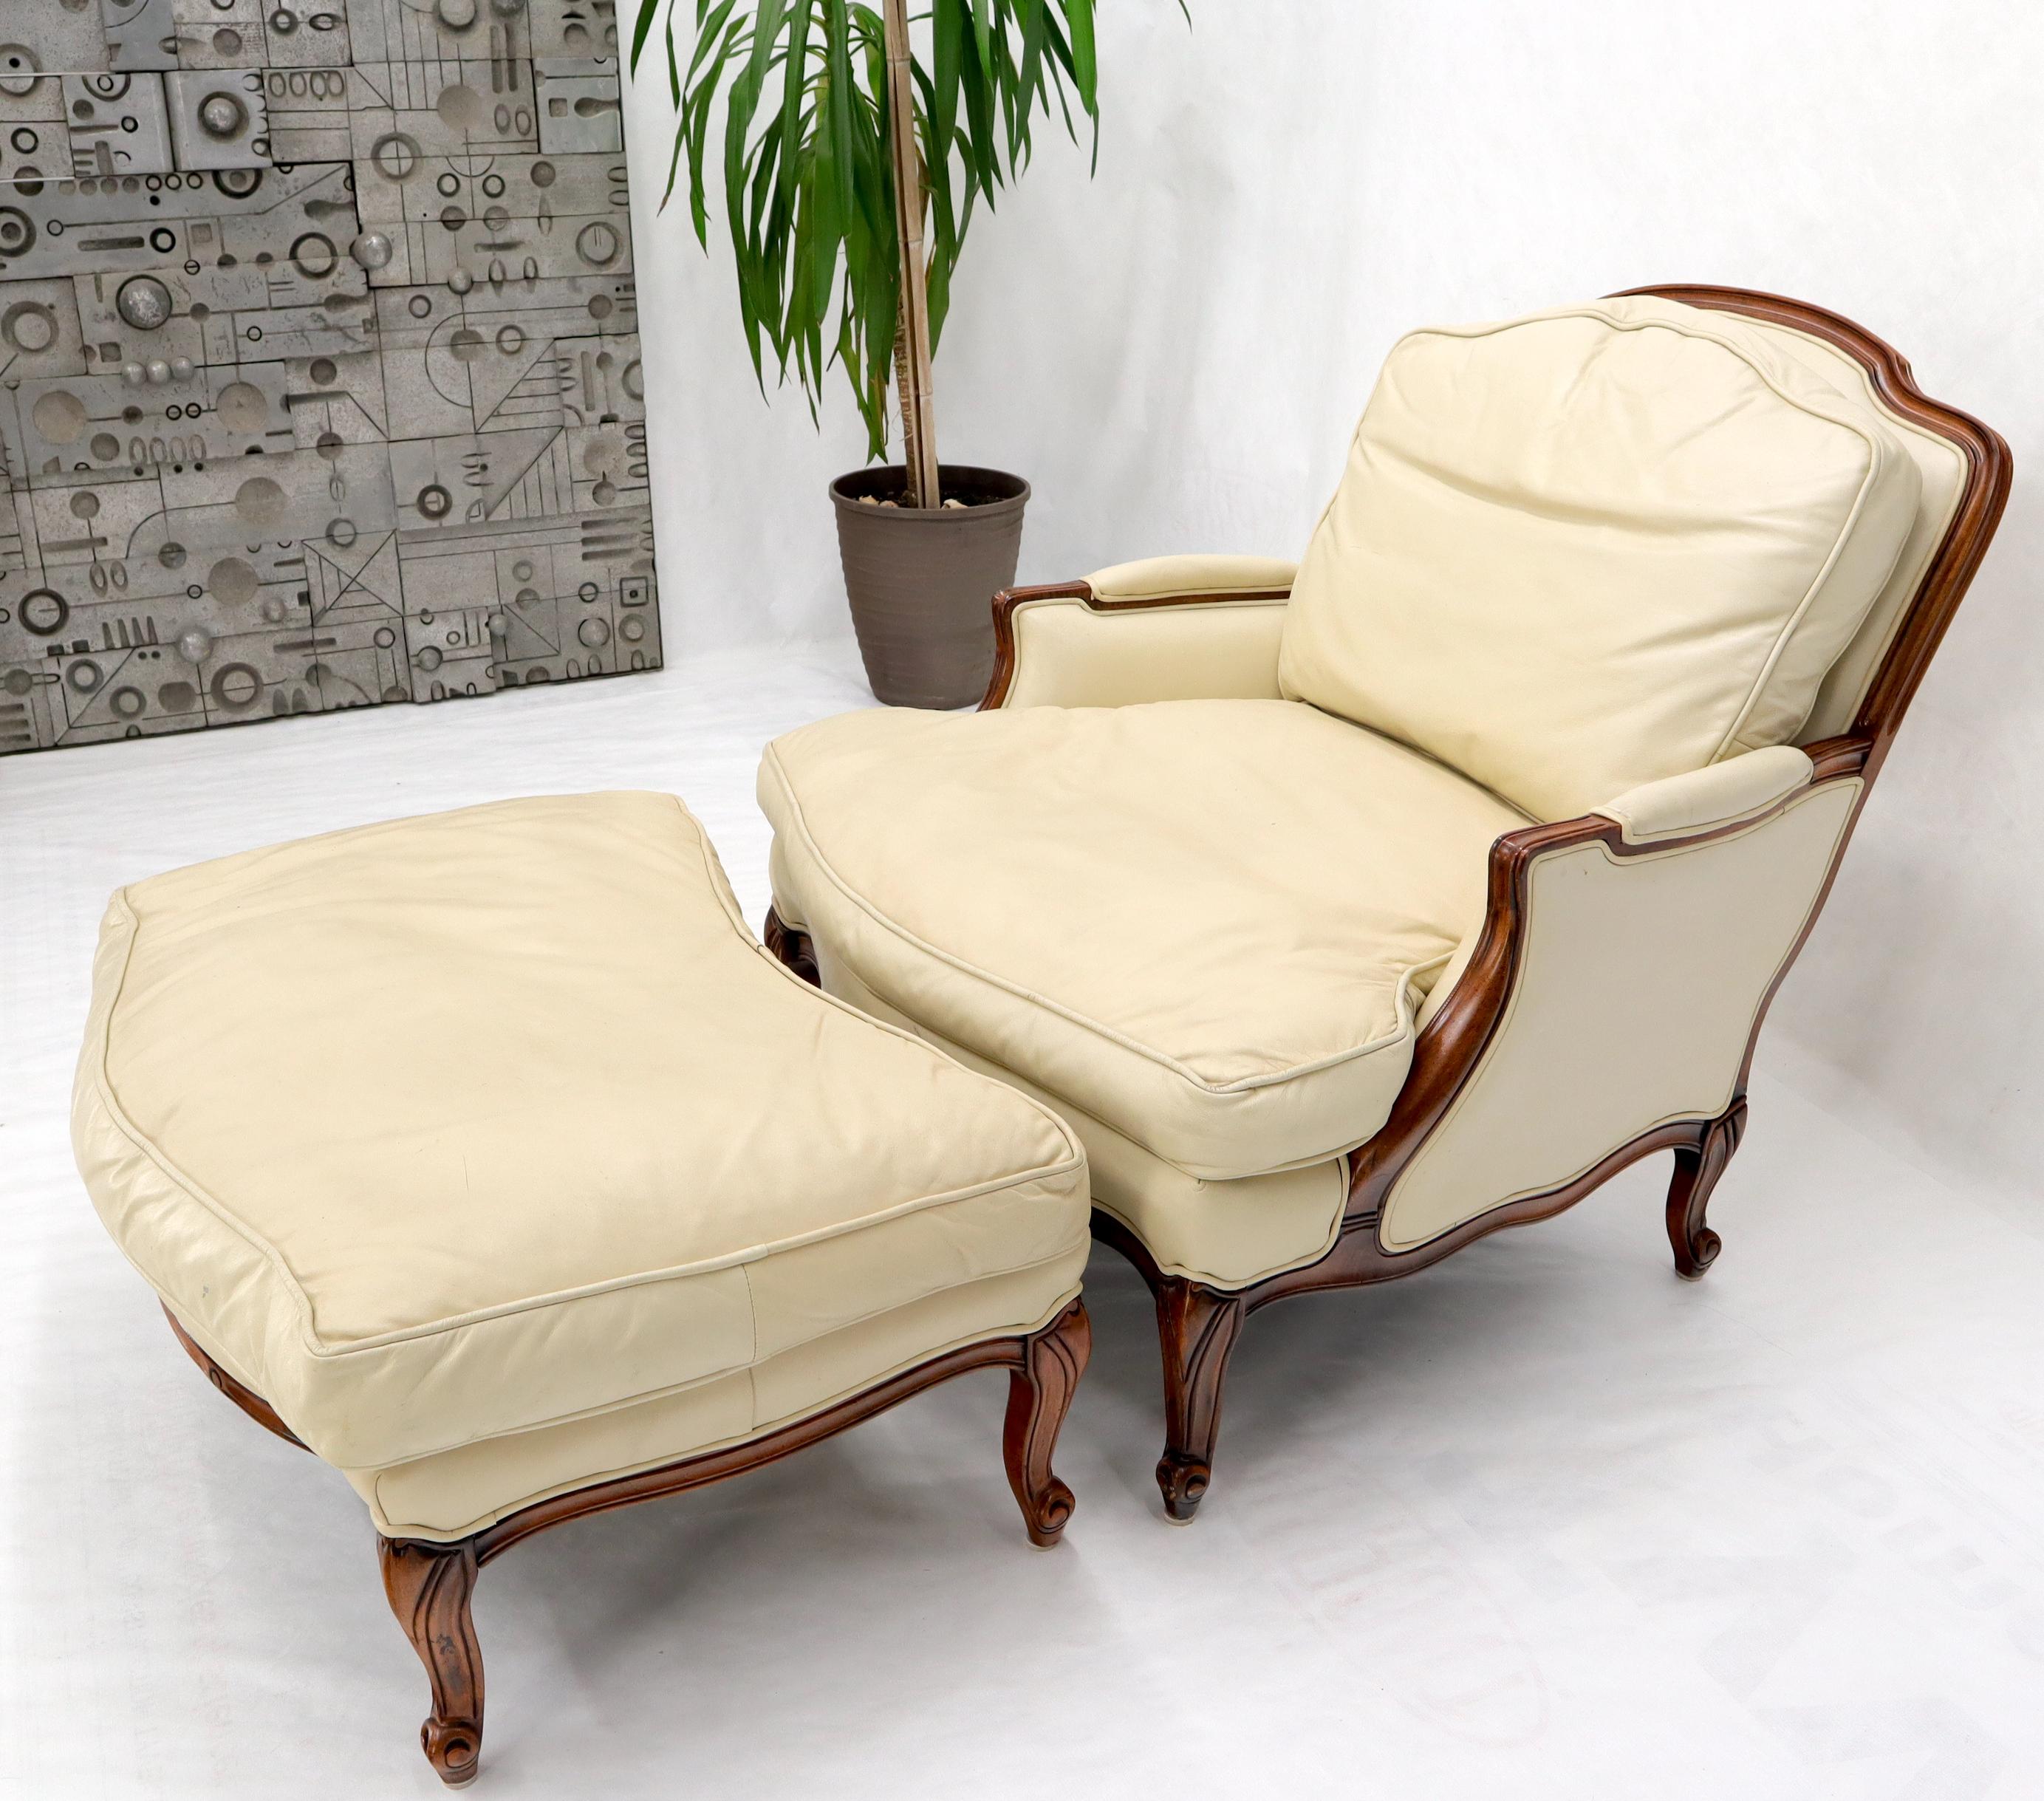 Cream Leather Chaise 2-Part Chaise Lounge Chair and Ottoman 1